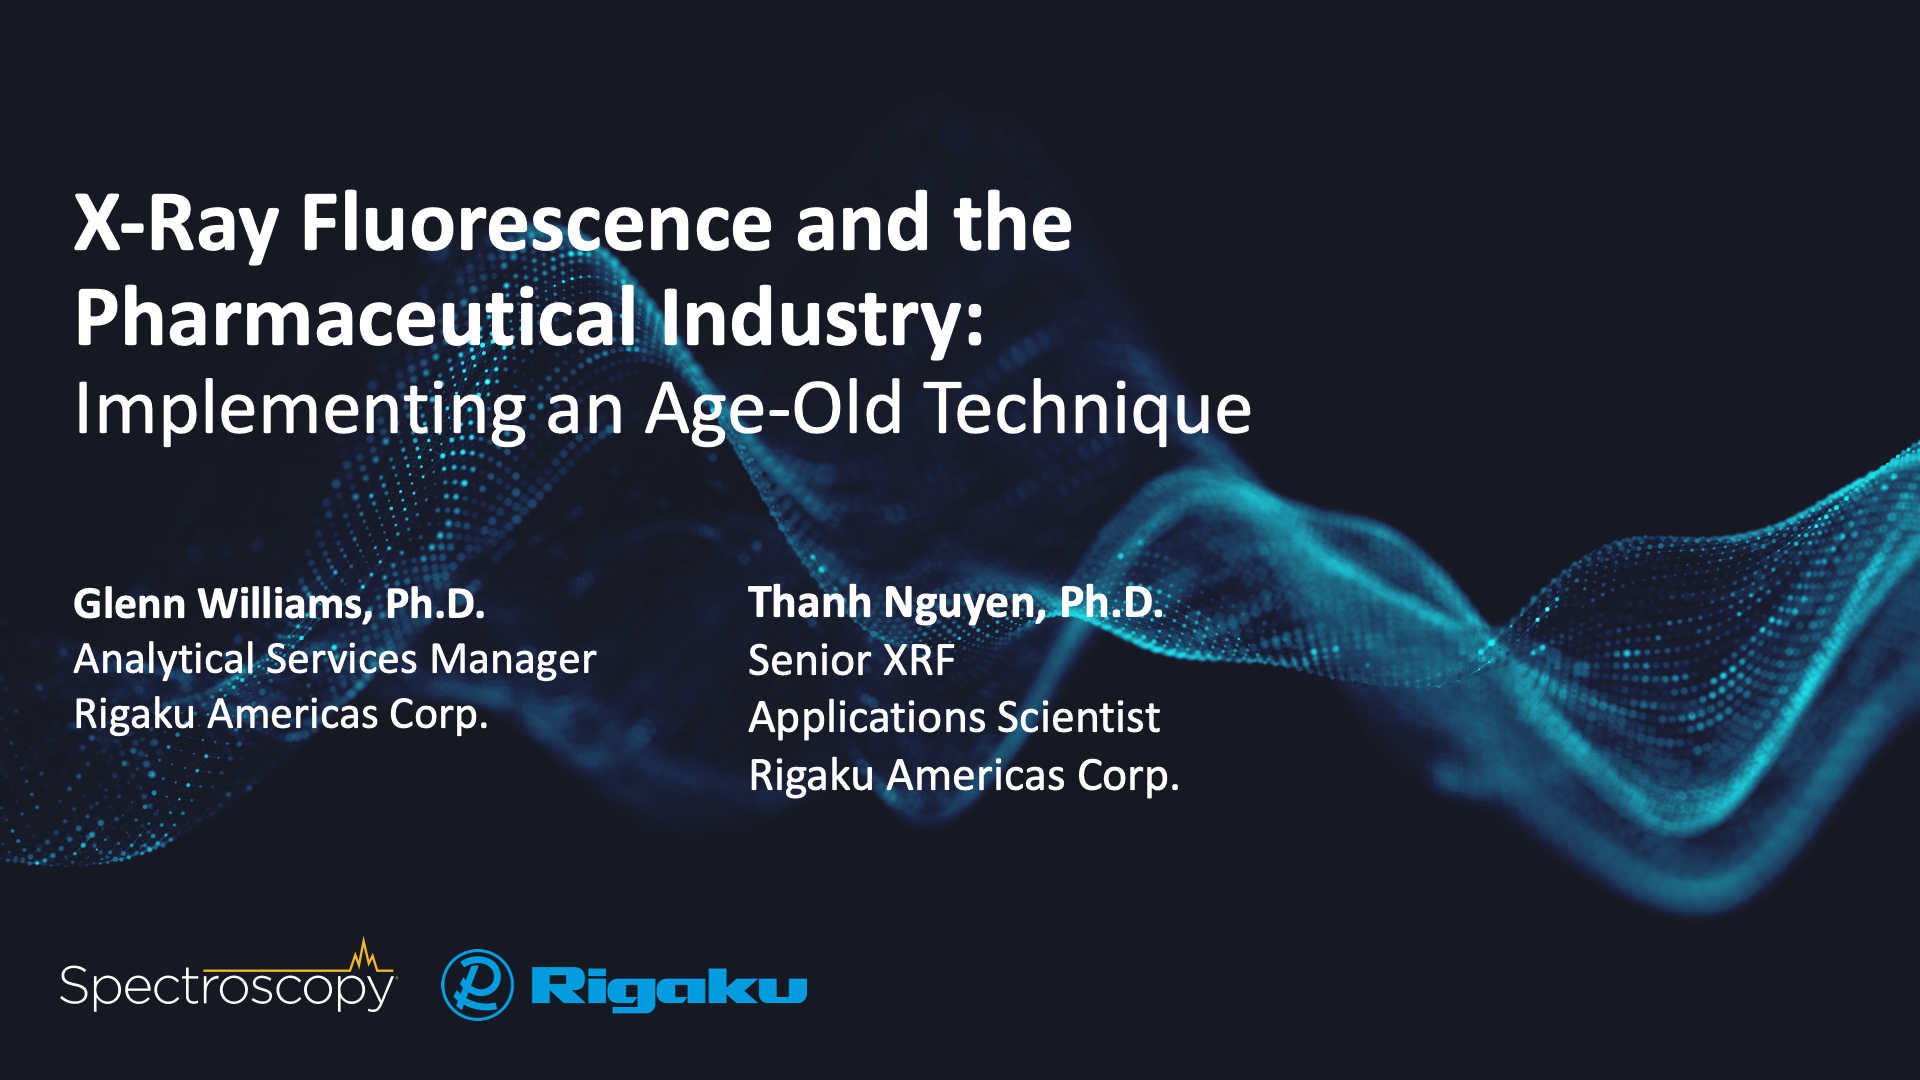 X-Ray Fluorescence and the Pharmaceutical Industry: Implementing an Age-Old Technique 